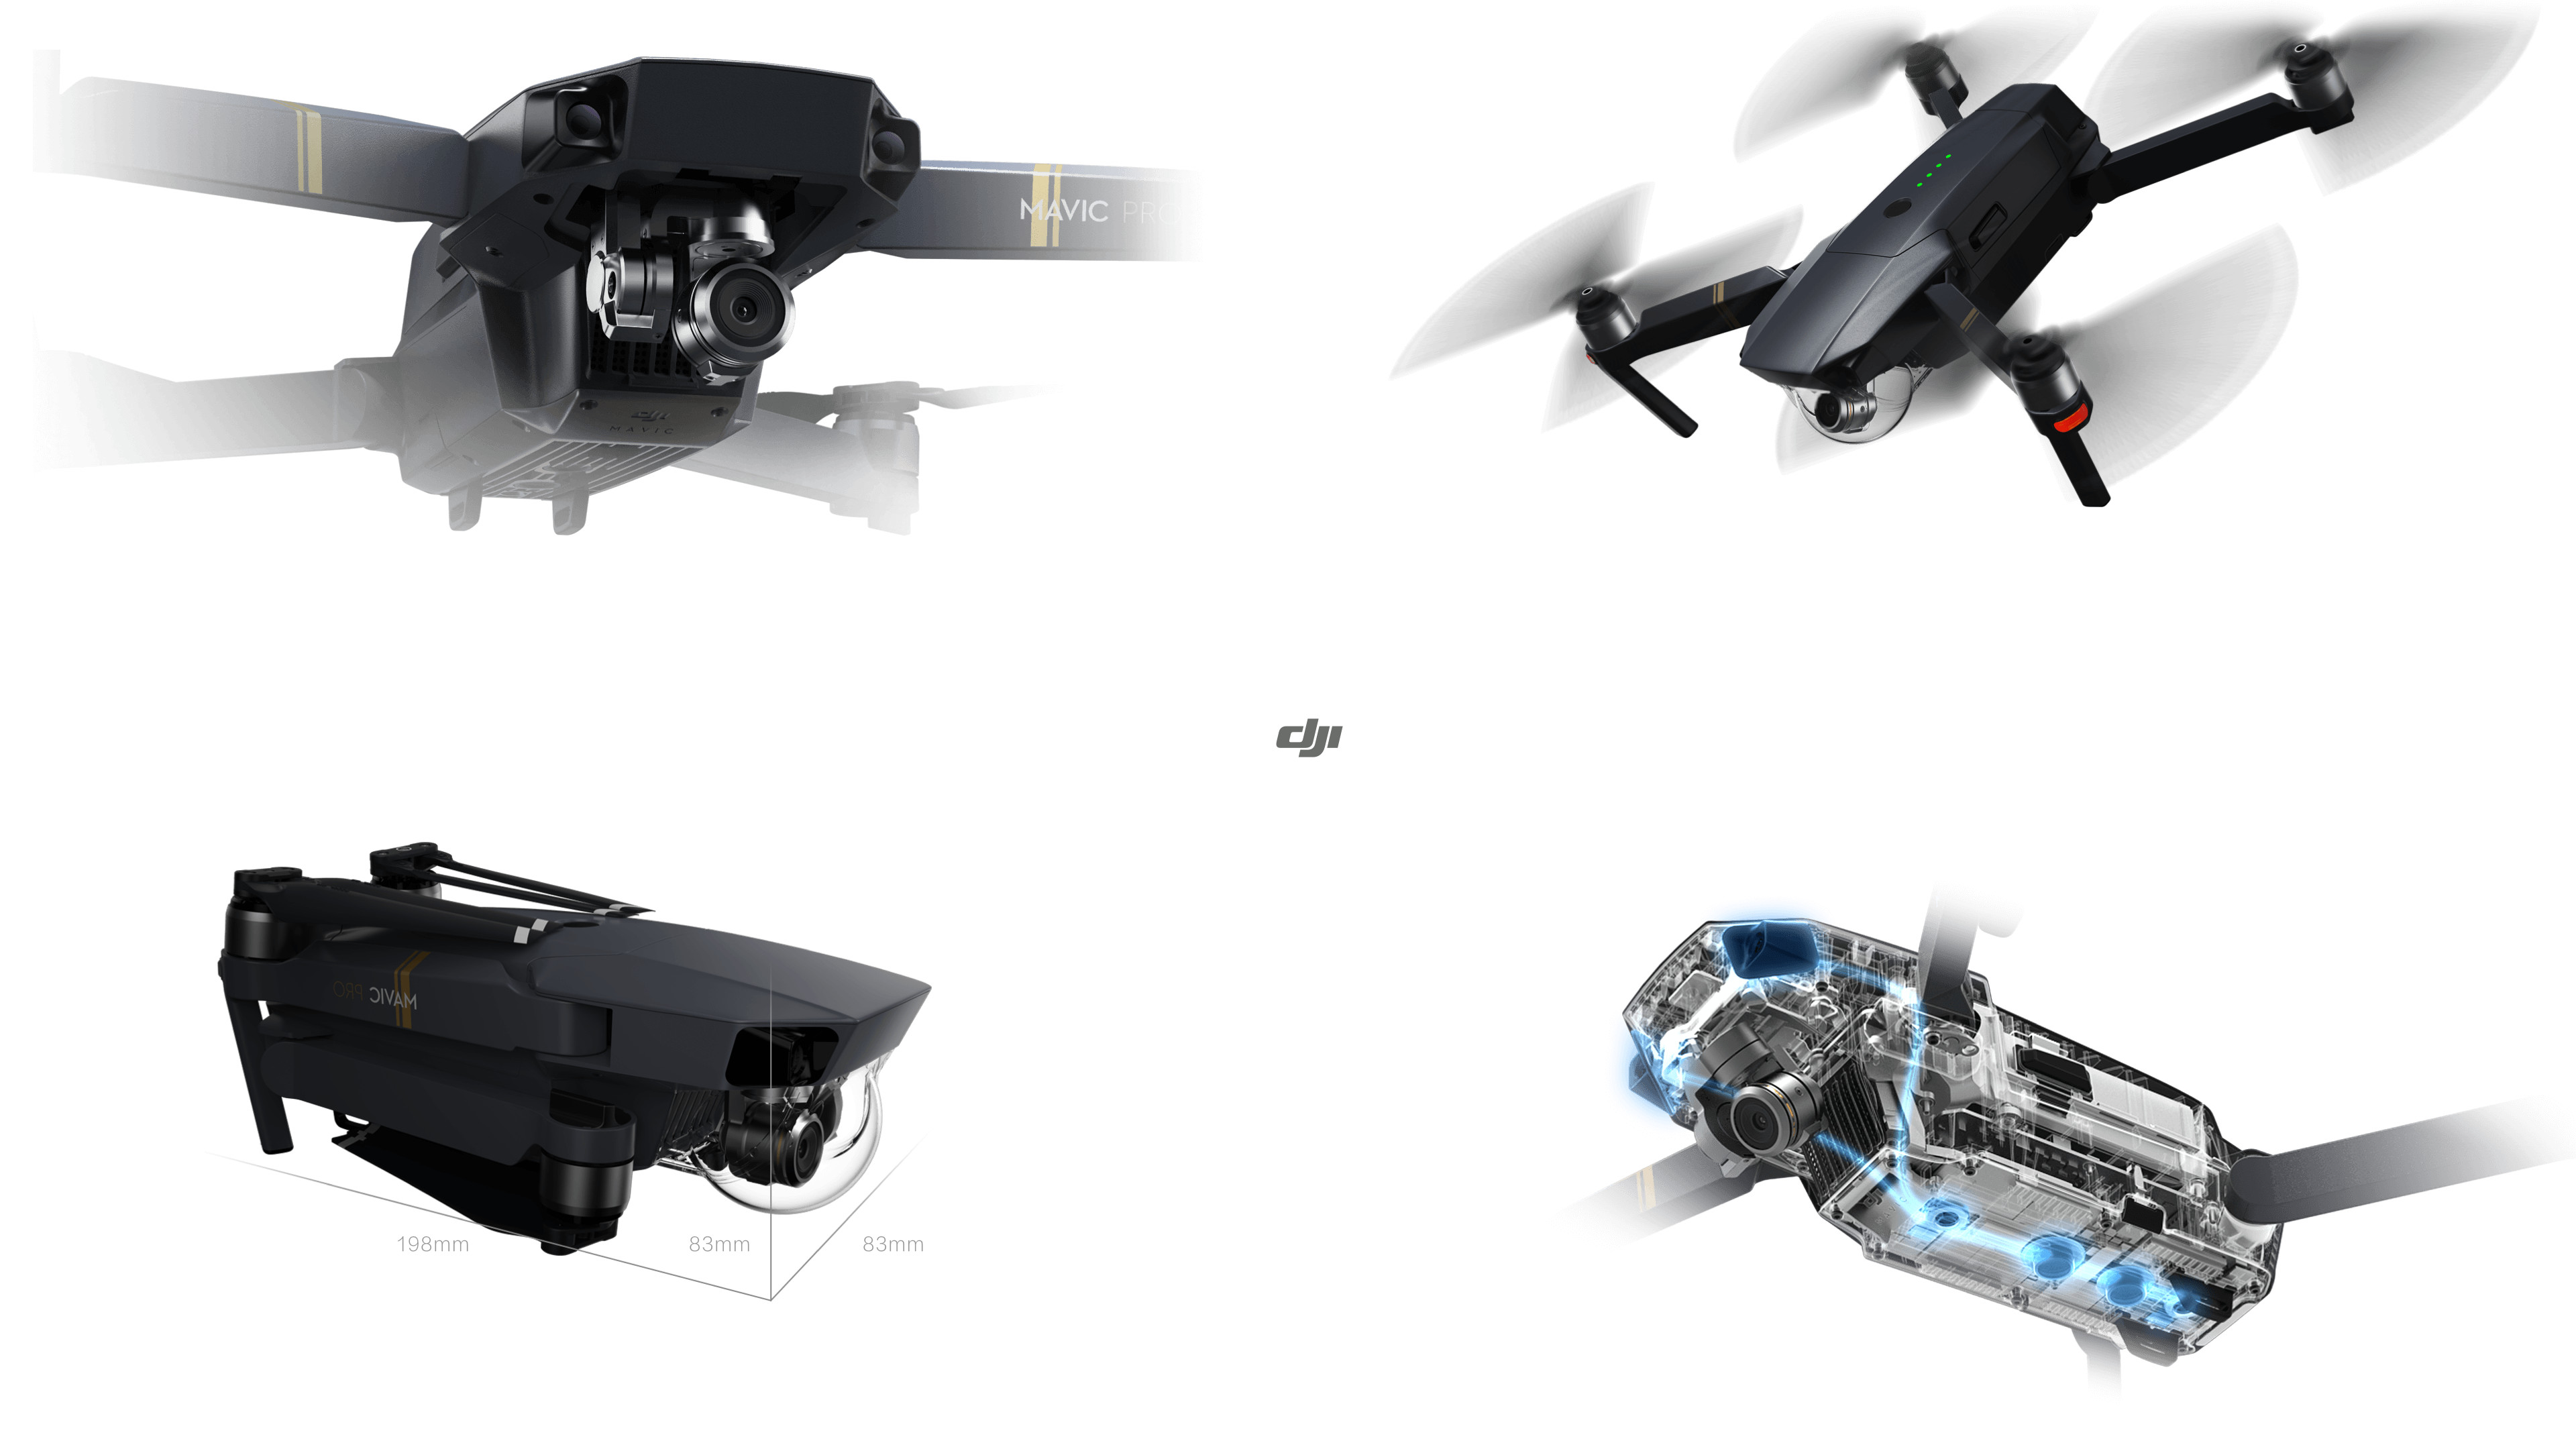 3840x2160 I made a 4k wallpaper of the Mavic. Transparent background. Images by DJI.